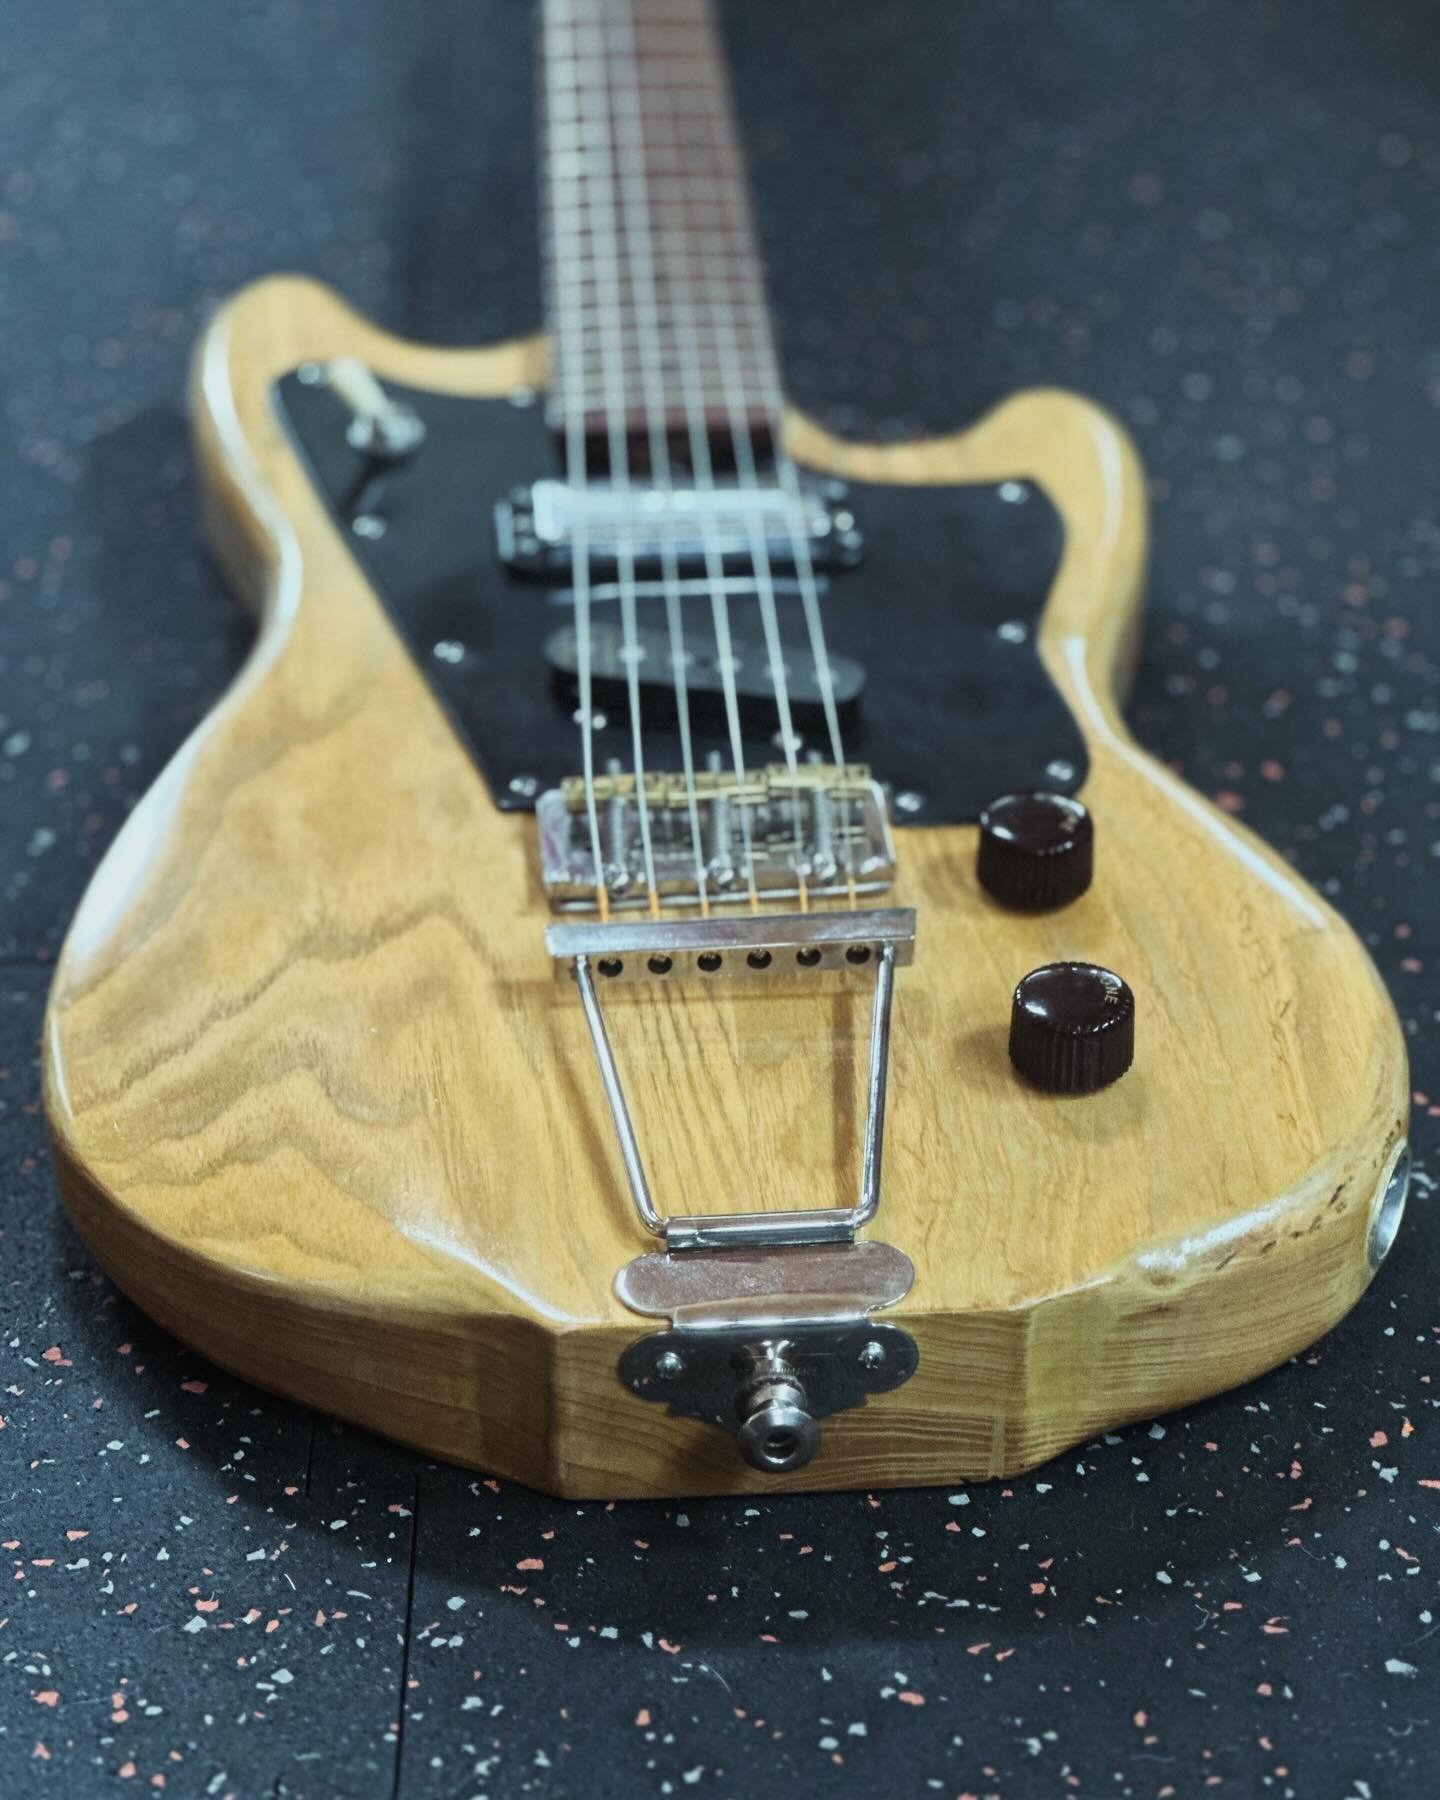 One of the first guitars I built is in the shop this week, and what a thrill it has been.  In my humble opinion, it&rsquo;s just dripping with soul, and with over a decade of heavy recording and gigging, it feels alive and well loved.  It&rsquo;s a s